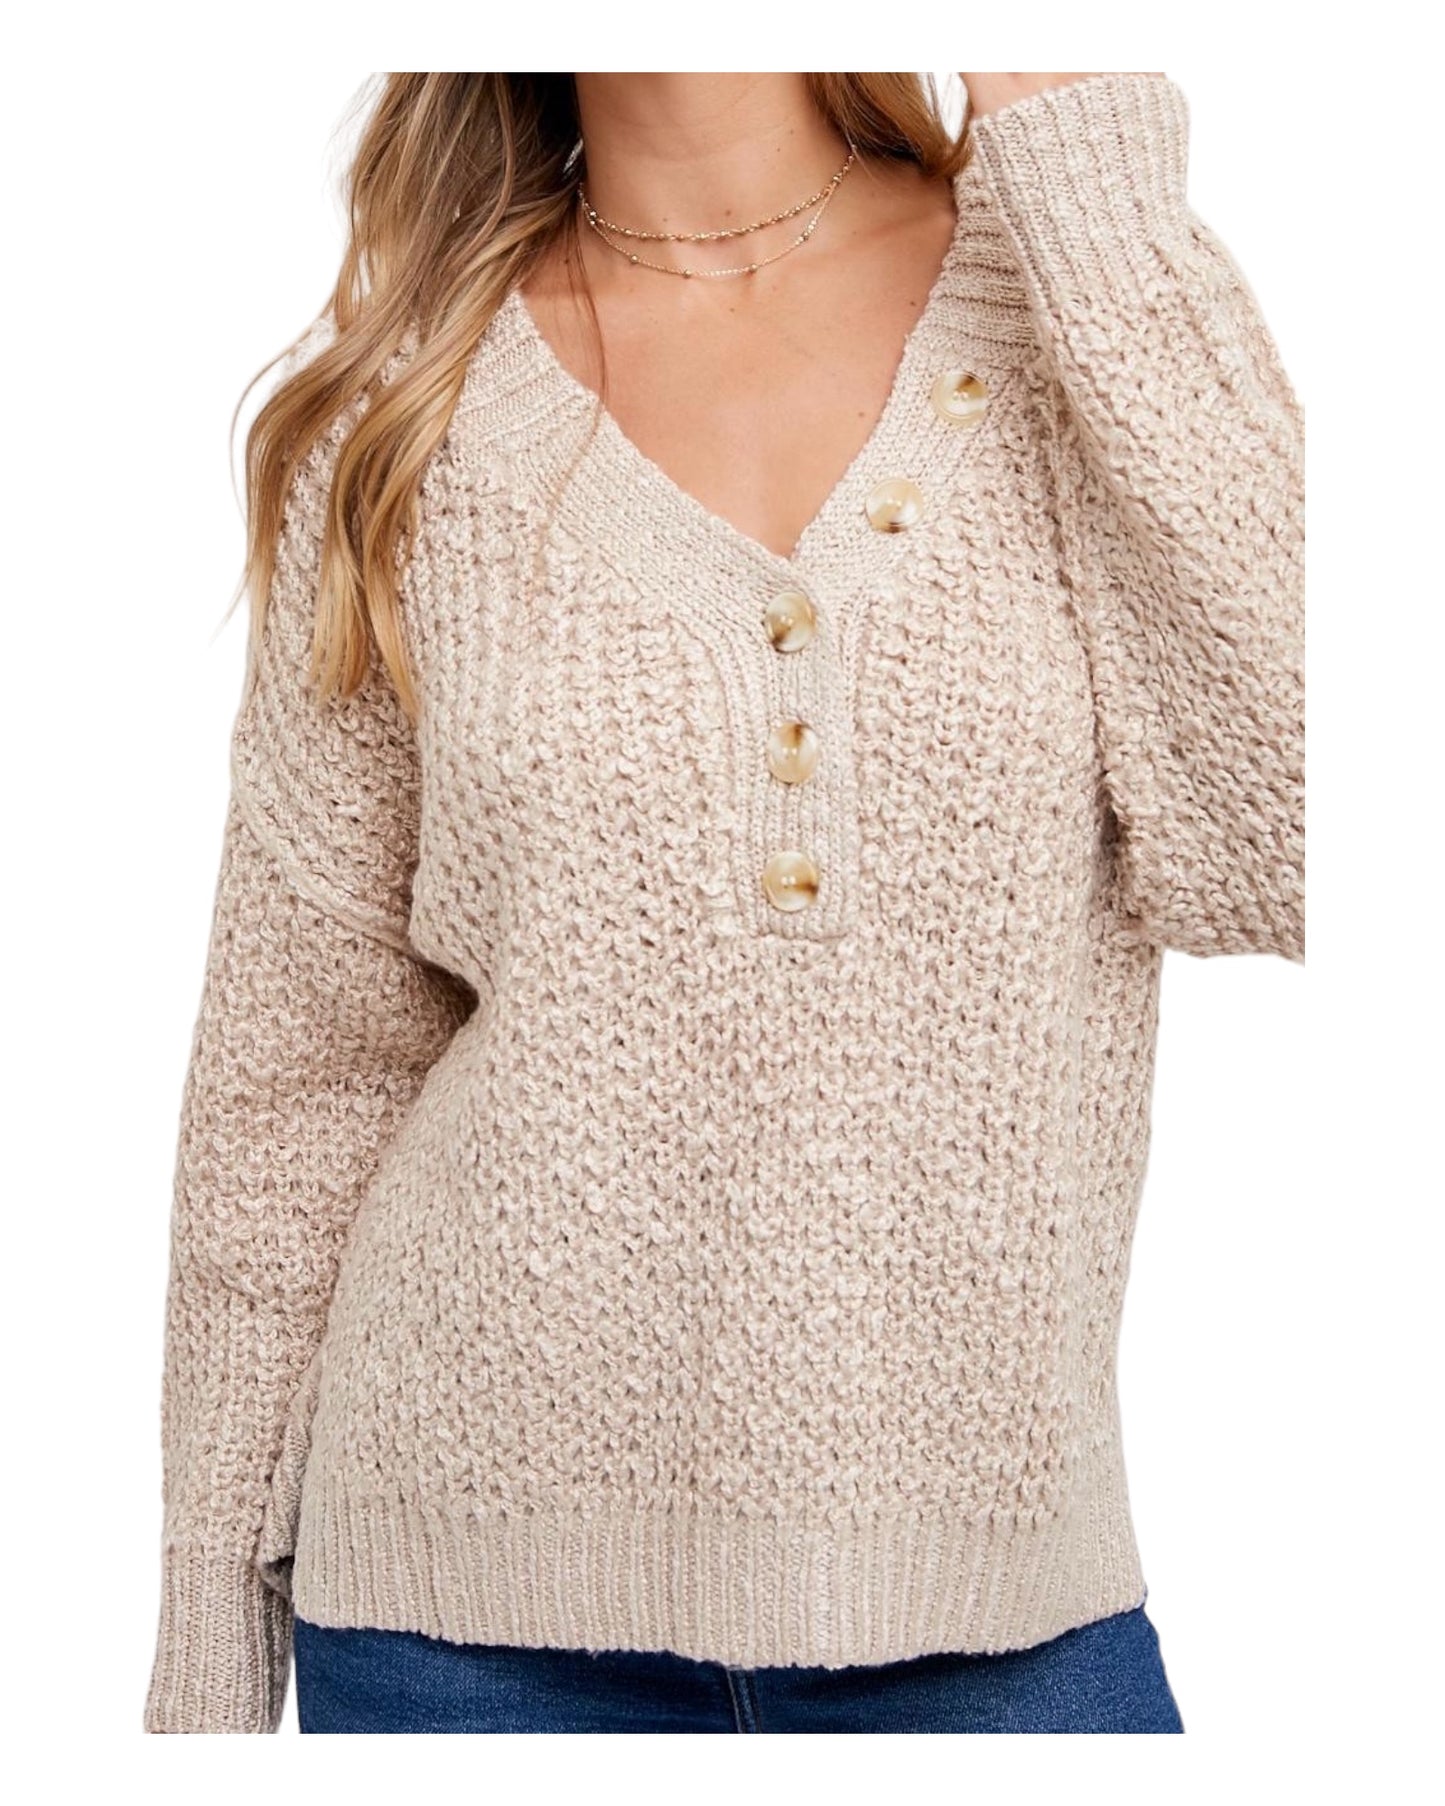 Blevine Henely Sweater